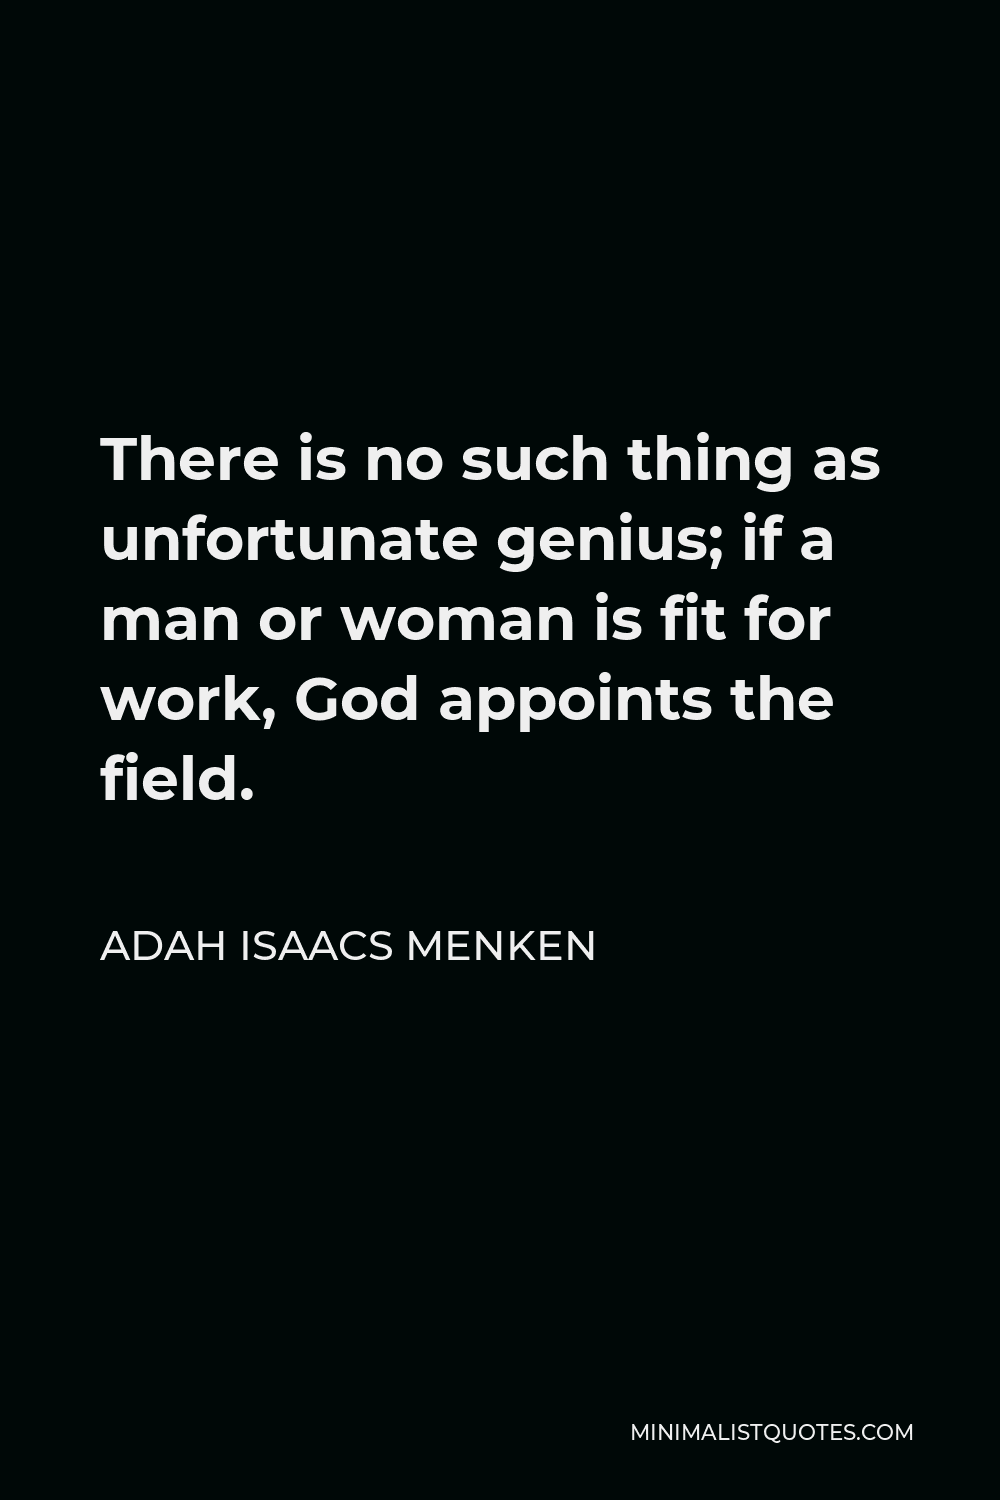 Adah Isaacs Menken Quote - There is no such thing as unfortunate genius; if a man or woman is fit for work, God appoints the field.